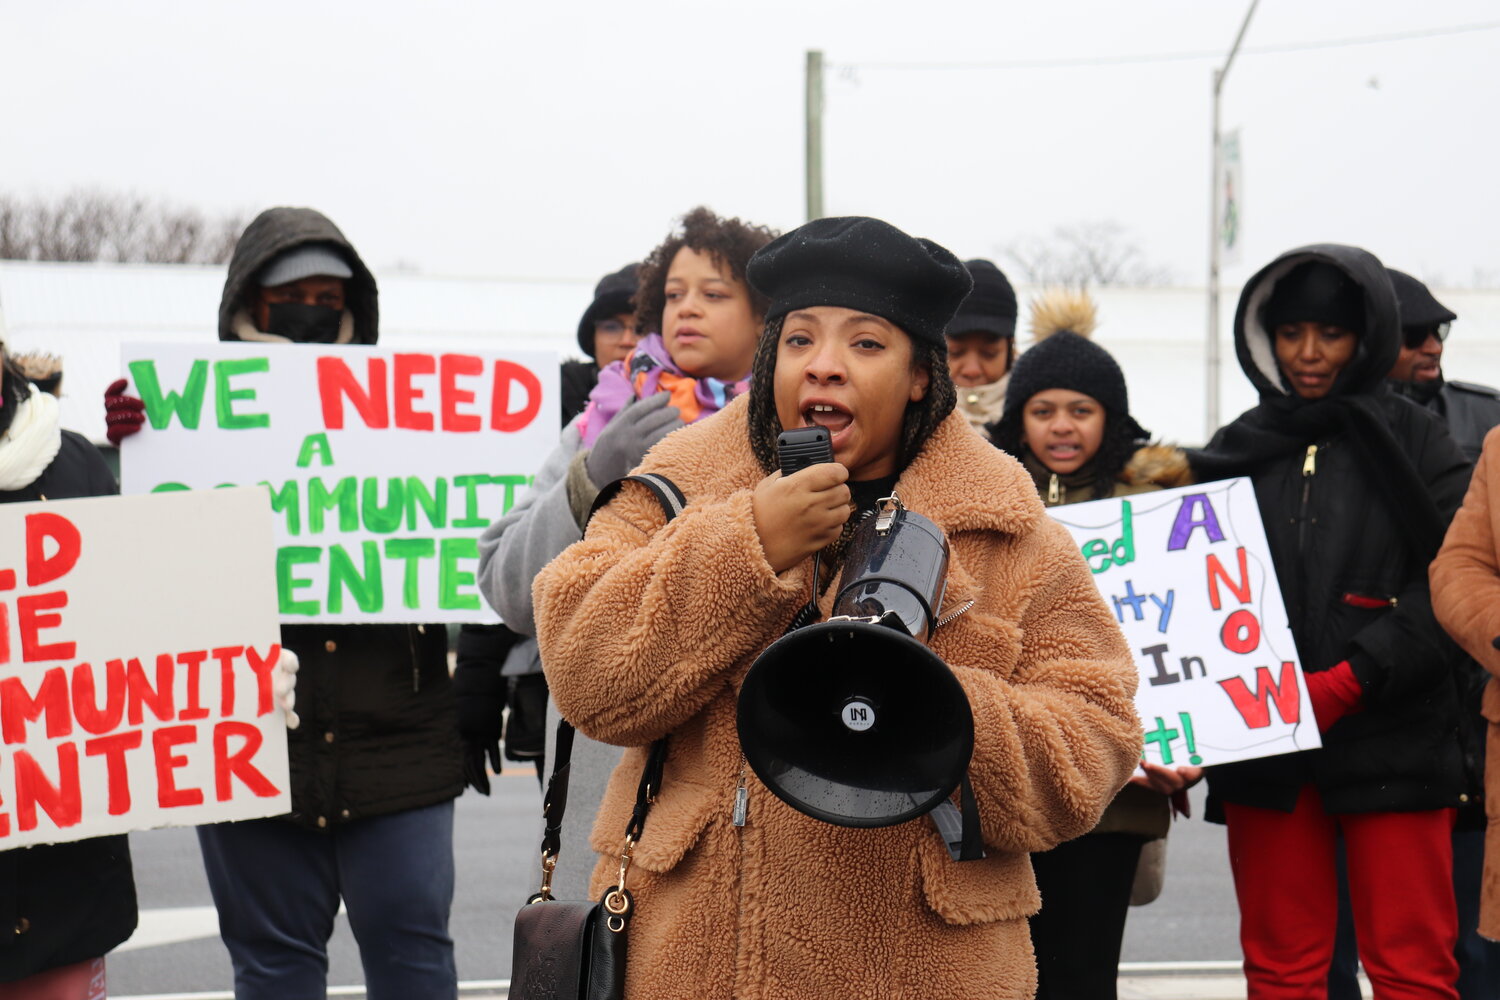 Tamar Paoli-Bailey, event coordinator and board member of the Elmont Cultural Center, and more than 20 community members gather on Hempstead Turnpike to rally for a community center in Elmont. A $1.3 billion Belmont Park Redevelopment Plan, announced in 2017, promised a 10,000-square-foot community center be built in Elmont. Five years later, the community is still waiting.